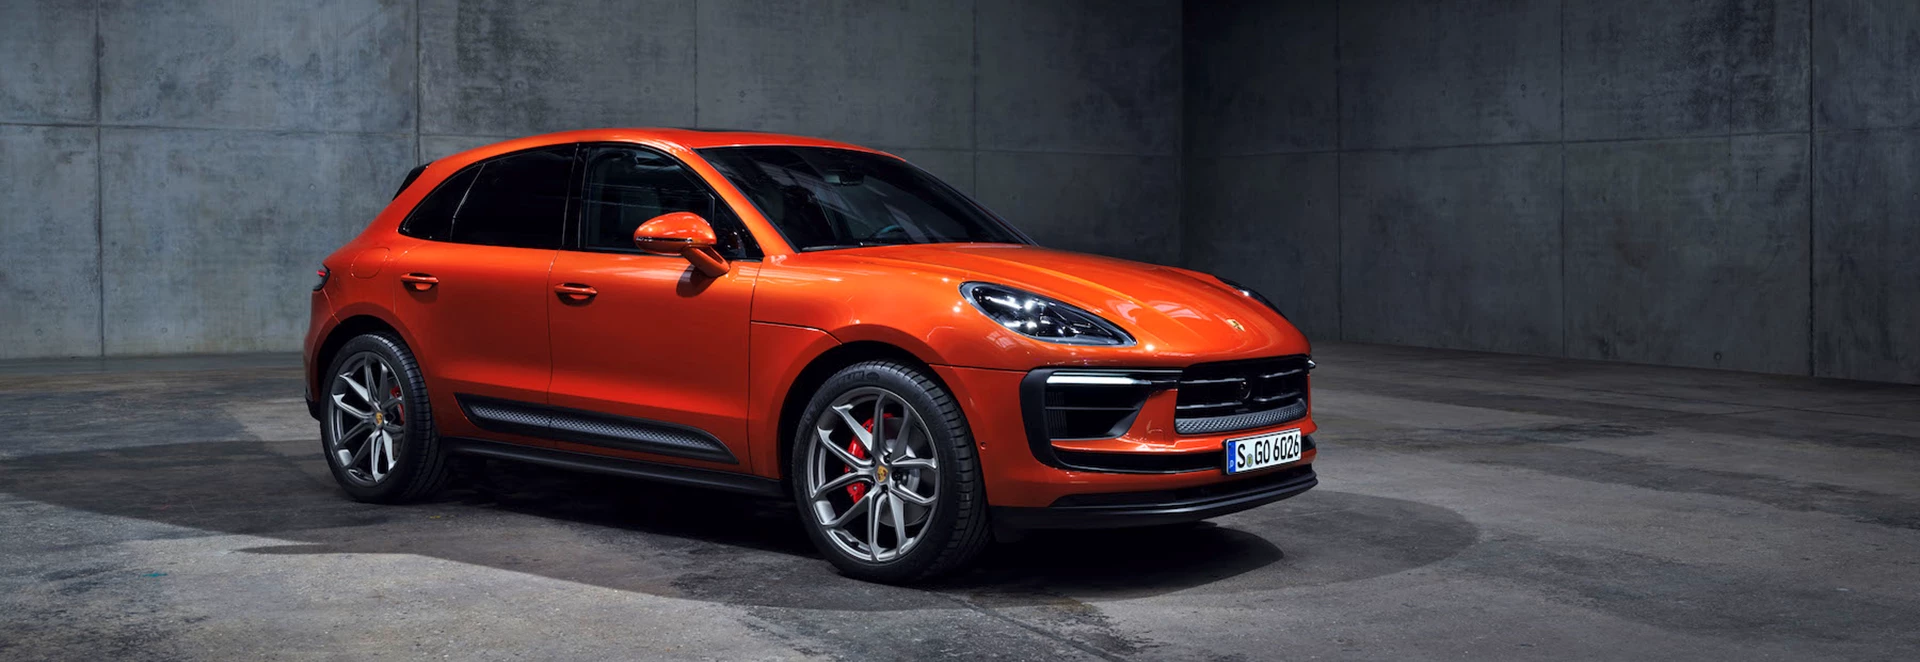 Updated Porsche Macan revealed with performance boost and revised look 